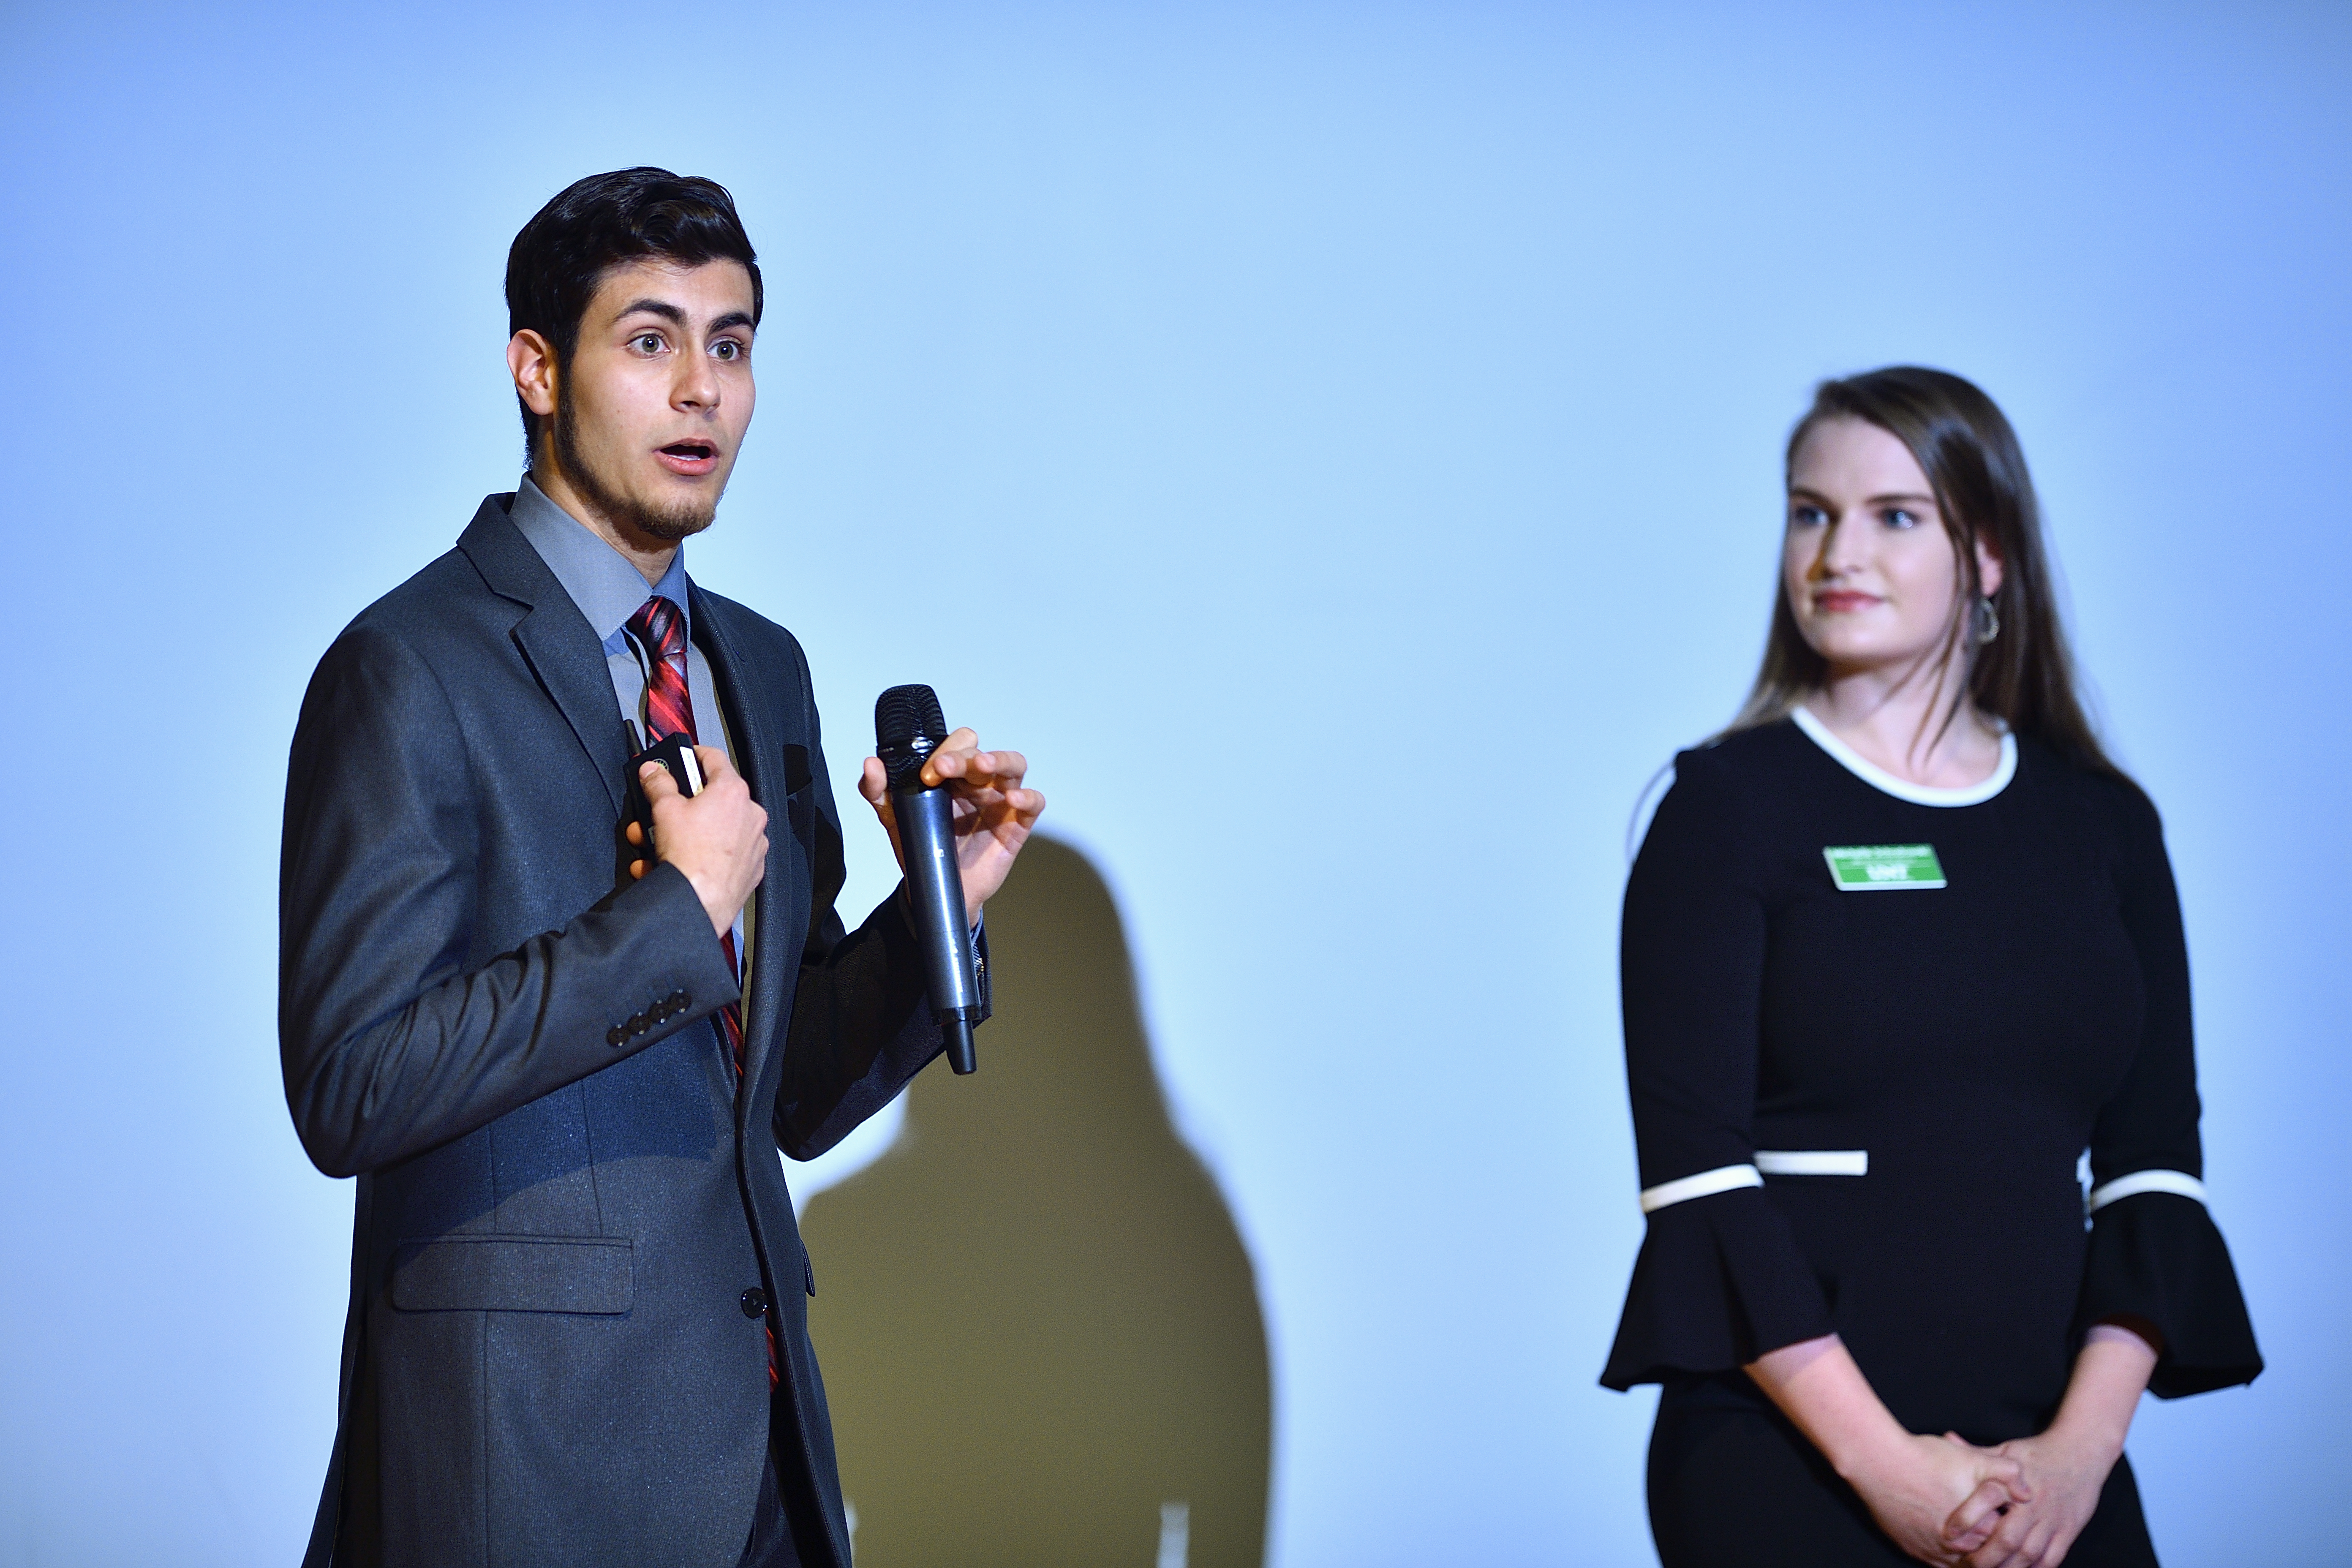 M.B.A. students Charles Laws and Michelle Schodowski won $20,000 in UNT's first Ed Tech Ascend pitch competition.